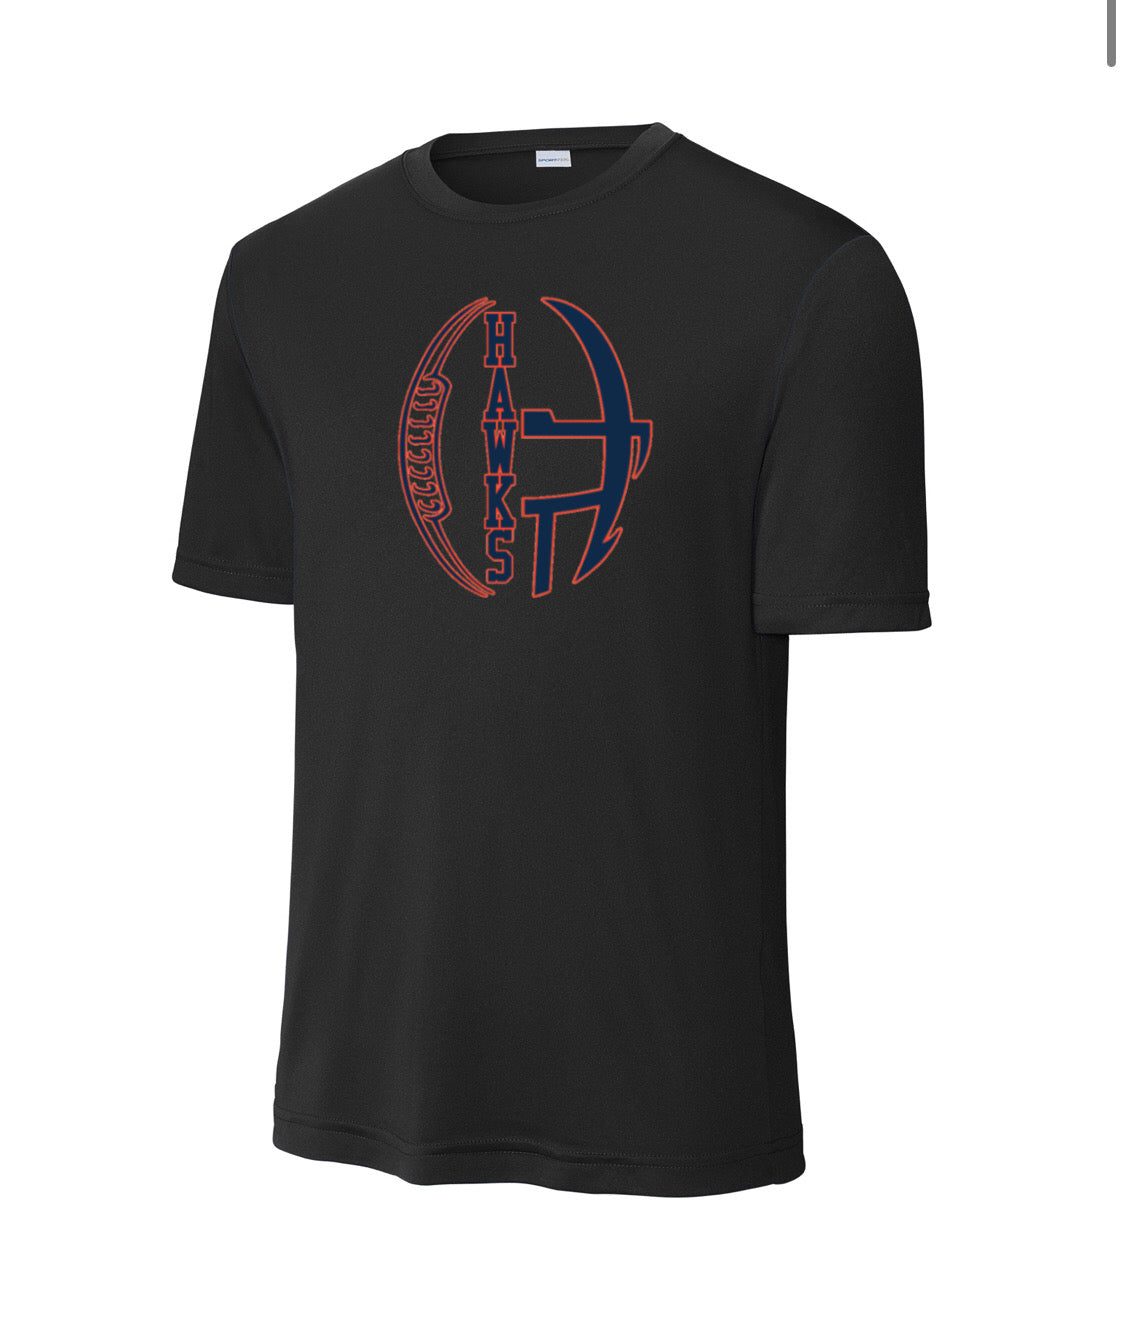 Hawks Football Performance T-Shirt - Multiple Color Options -(ALL PRODUCTS WILL BE DELIVERED TO SCHOOL)